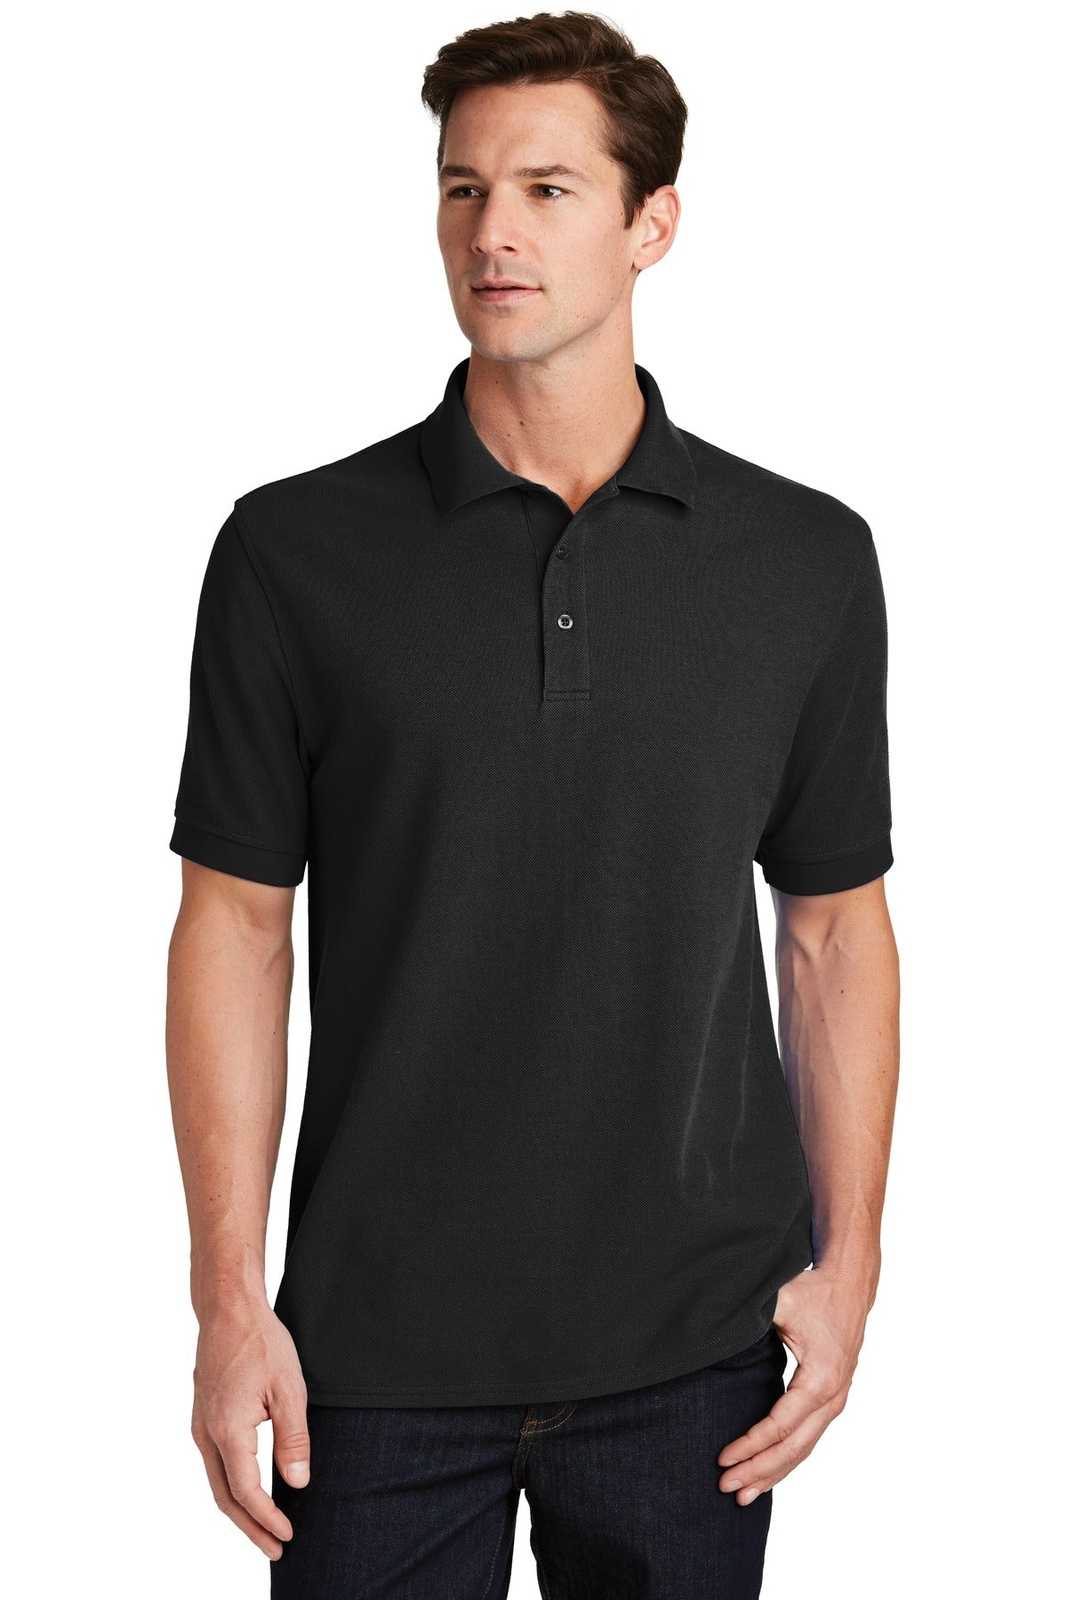 Port & Company KP1500 Combed Ring Spun Pique Polo - Jet Black - HIT a Double - 1